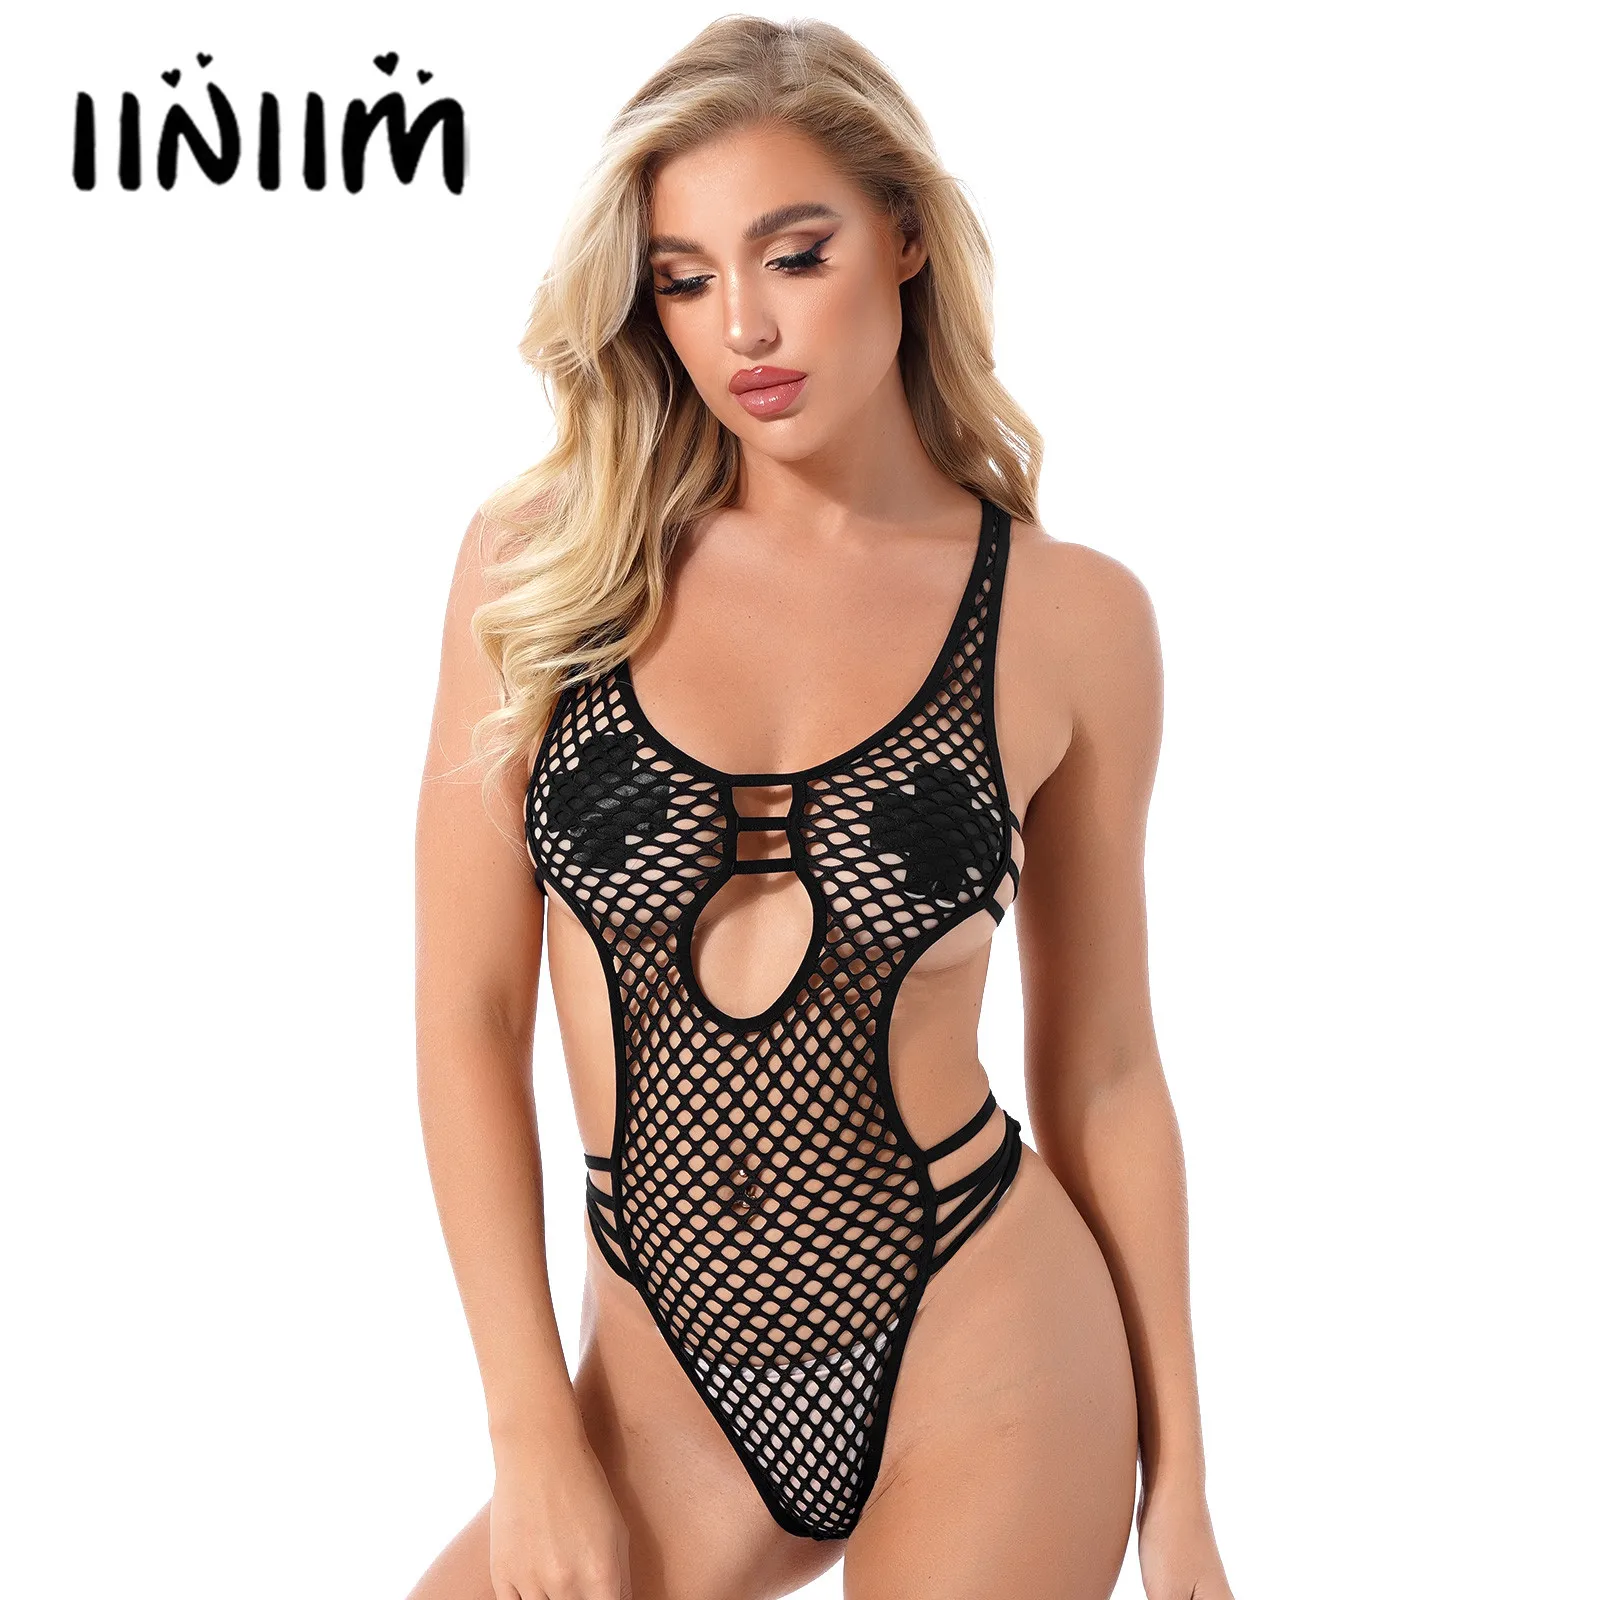 

Womens Lingerie Sexy Bodysuit Hollow Out Fishnet Plunging Neckline Strappy Leotard See-through Mesh Cutout High Cut Teddies